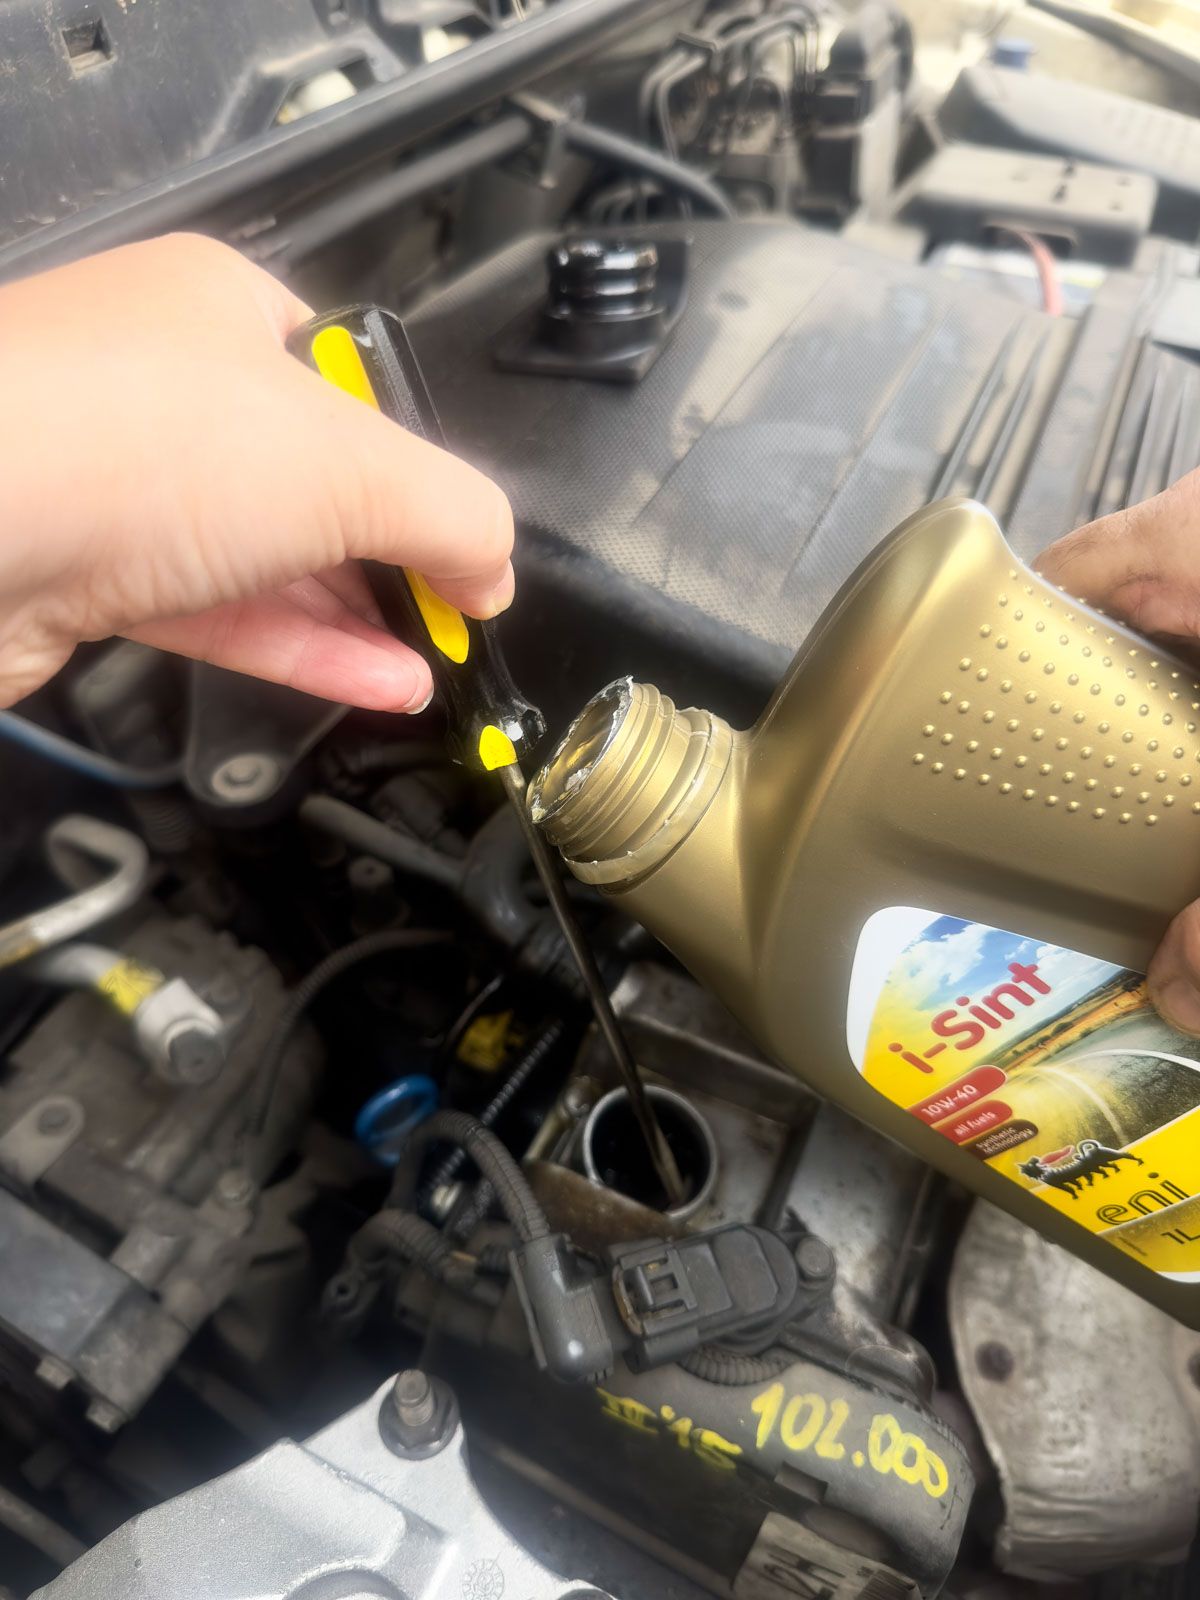 Use a Screw Driver to Pour Out the Oil